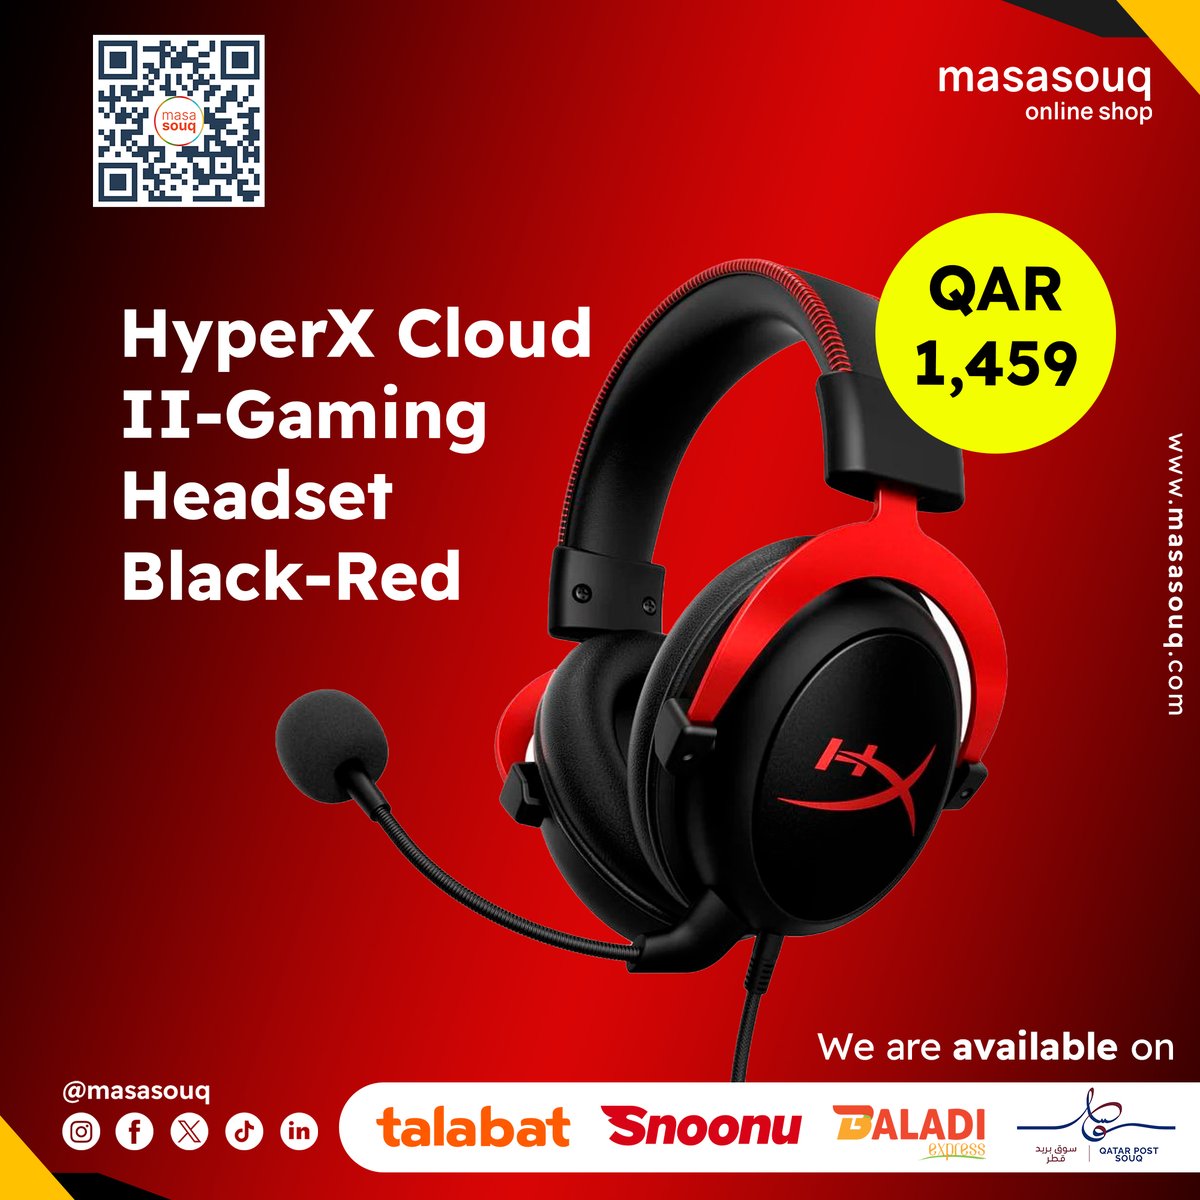 Level up your gaming! 🎮🎧  Experience crystal-clear sound and unbeatable comfort with the HyperX Cloud II Gaming Headset. Now for QAR409! Order now: masasouq.com/hyperx-cloud-i…  #HyperX #GamingHeadset #Sound #ImmersiveAudio #masasouq